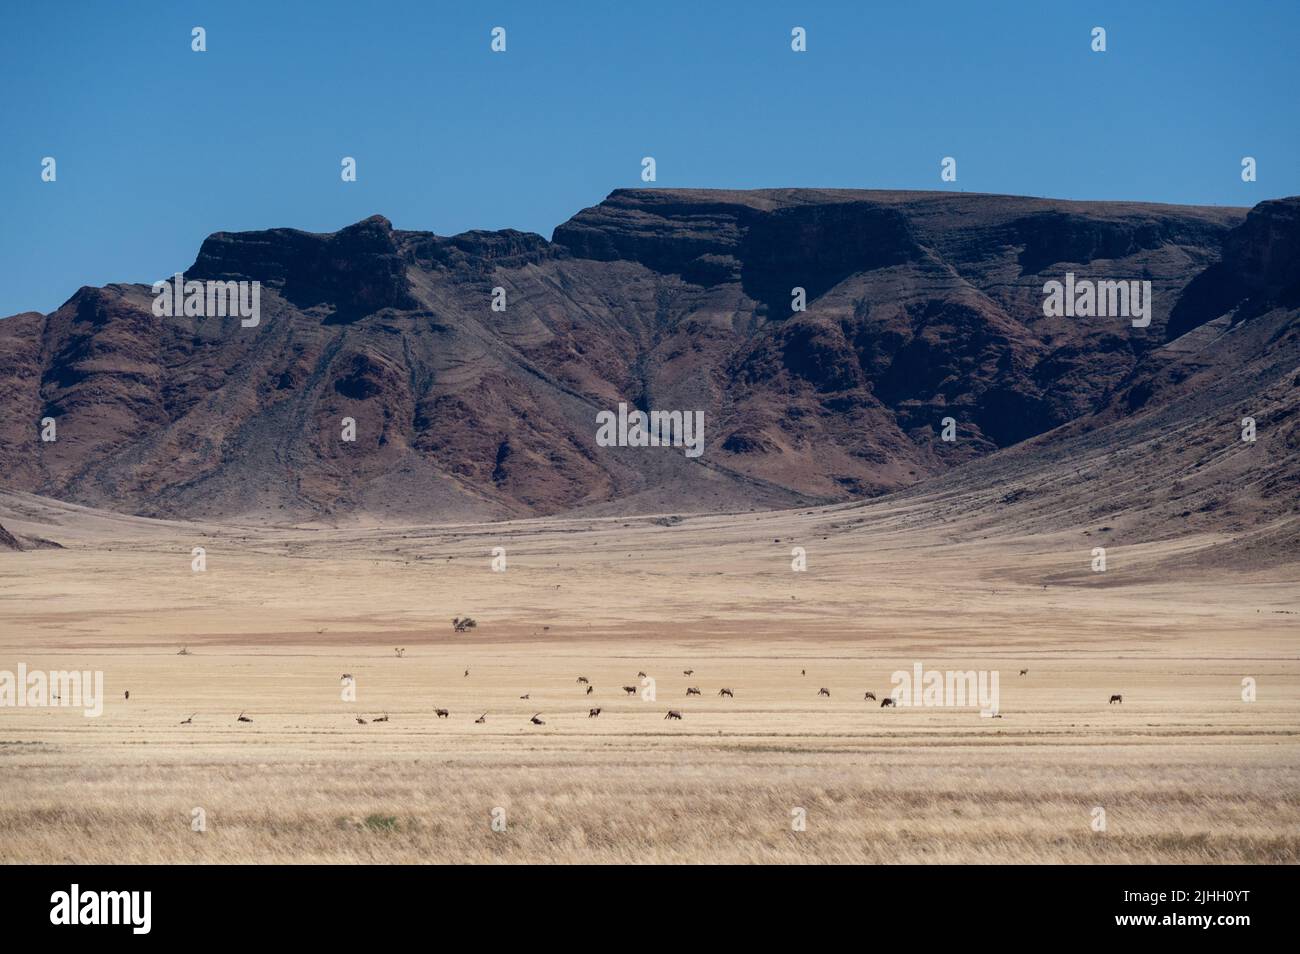 wide angle view of desert oryx with mountain background Stock Photo